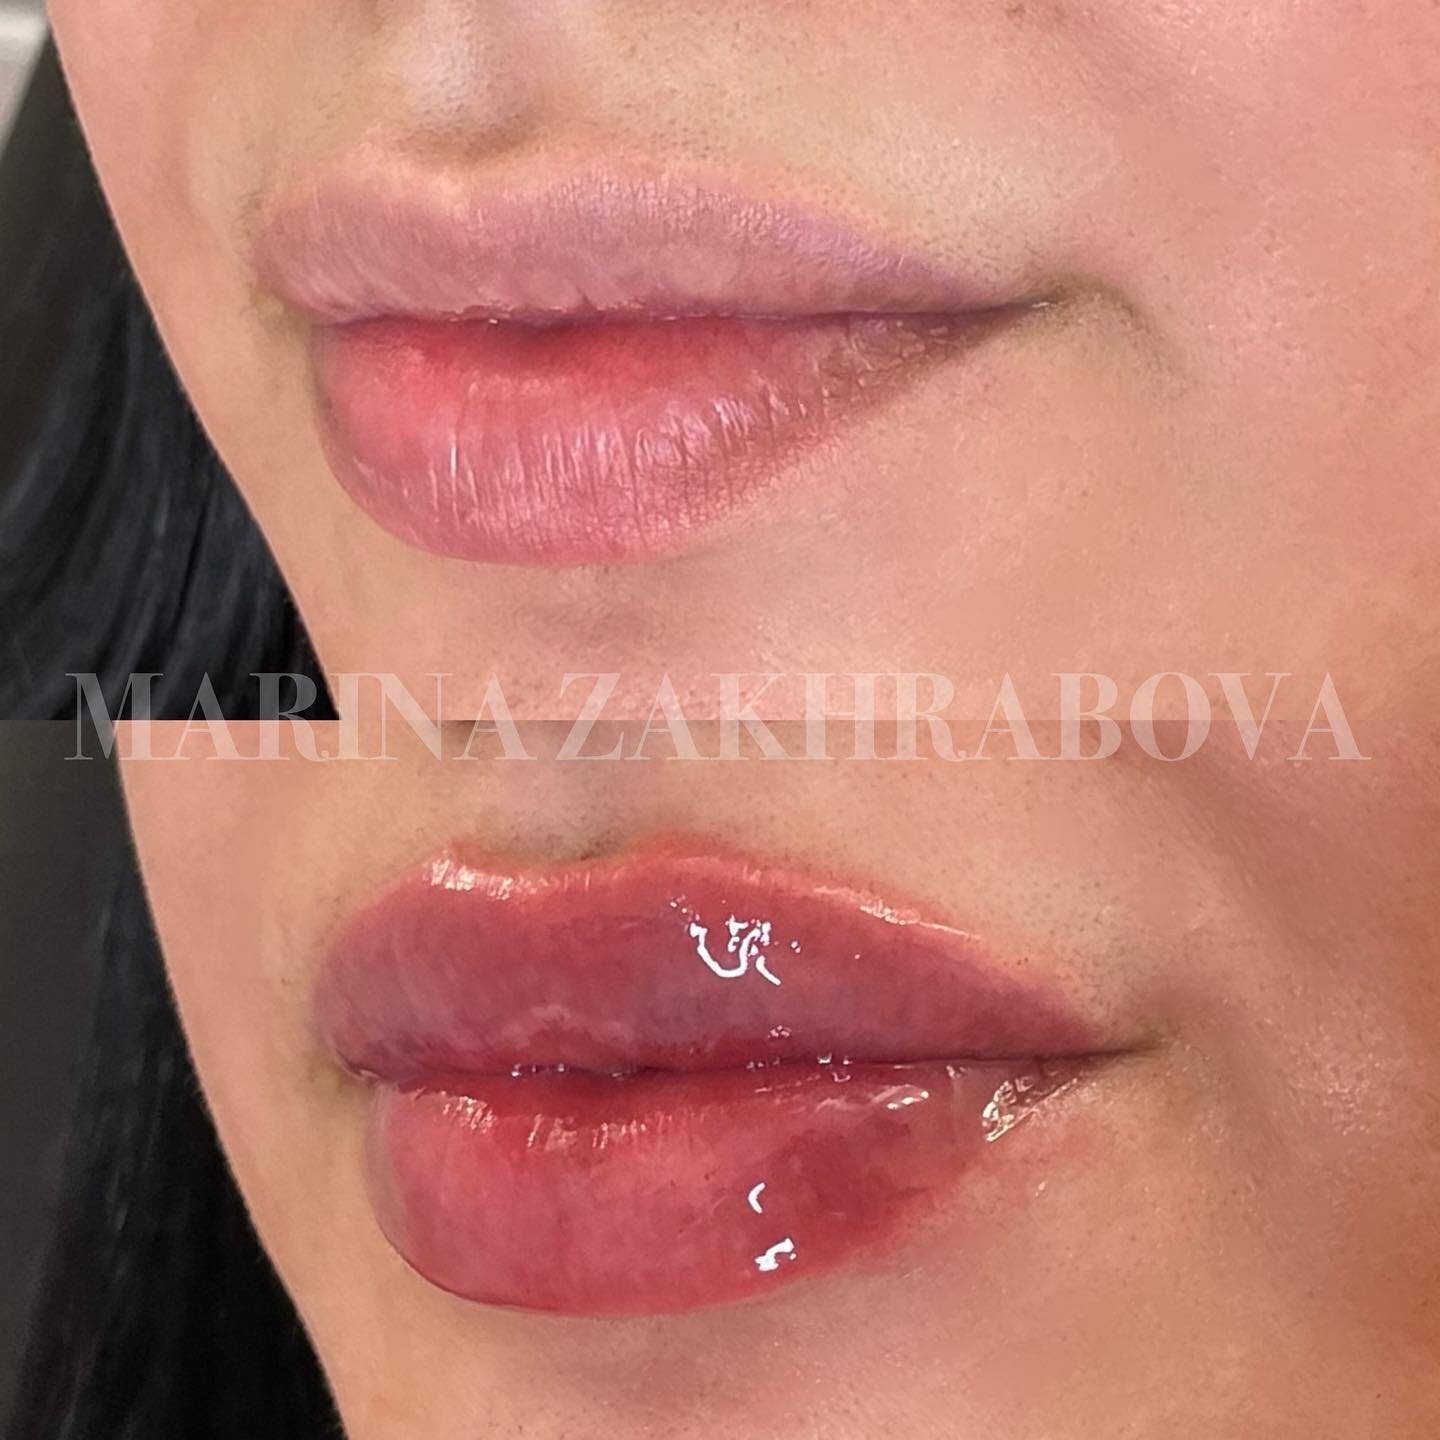 Adding volume in all the right places with LIP FILLER to create the perfect plump pout 💋

💉 Product: Restylane Kysse
⚖️ Amount: 0.5 mL
💵 Price: varies
📆 Longevity: up to 12 months
⏰ Appointment time: 30-45 minutes
❤️&zwj;🩹 Downtime: swelling and